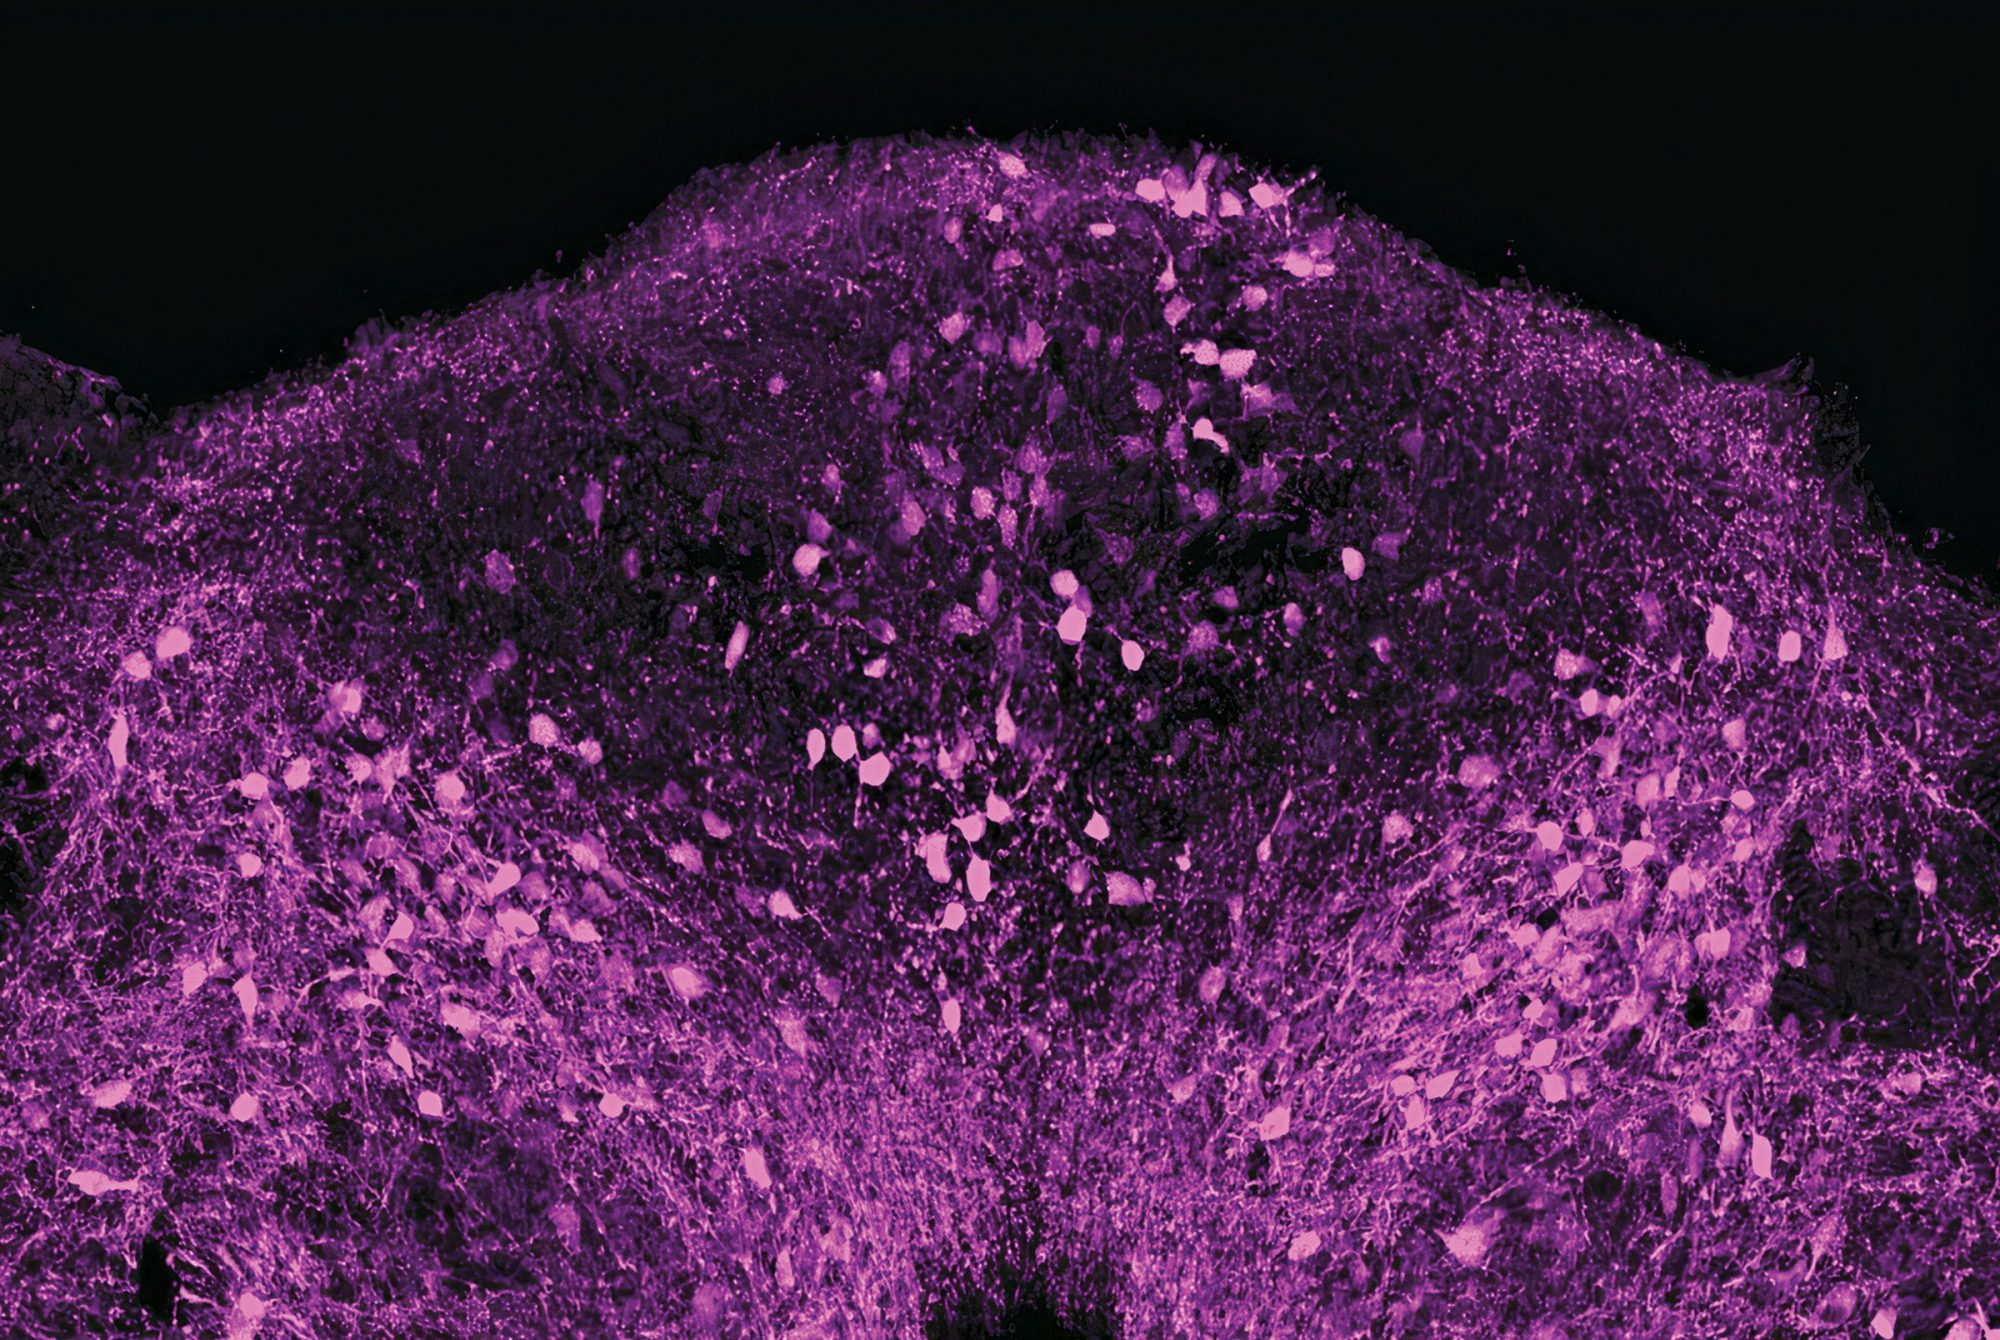 These neurons provide clues to what the brain is up to when the body fights a pathogen.